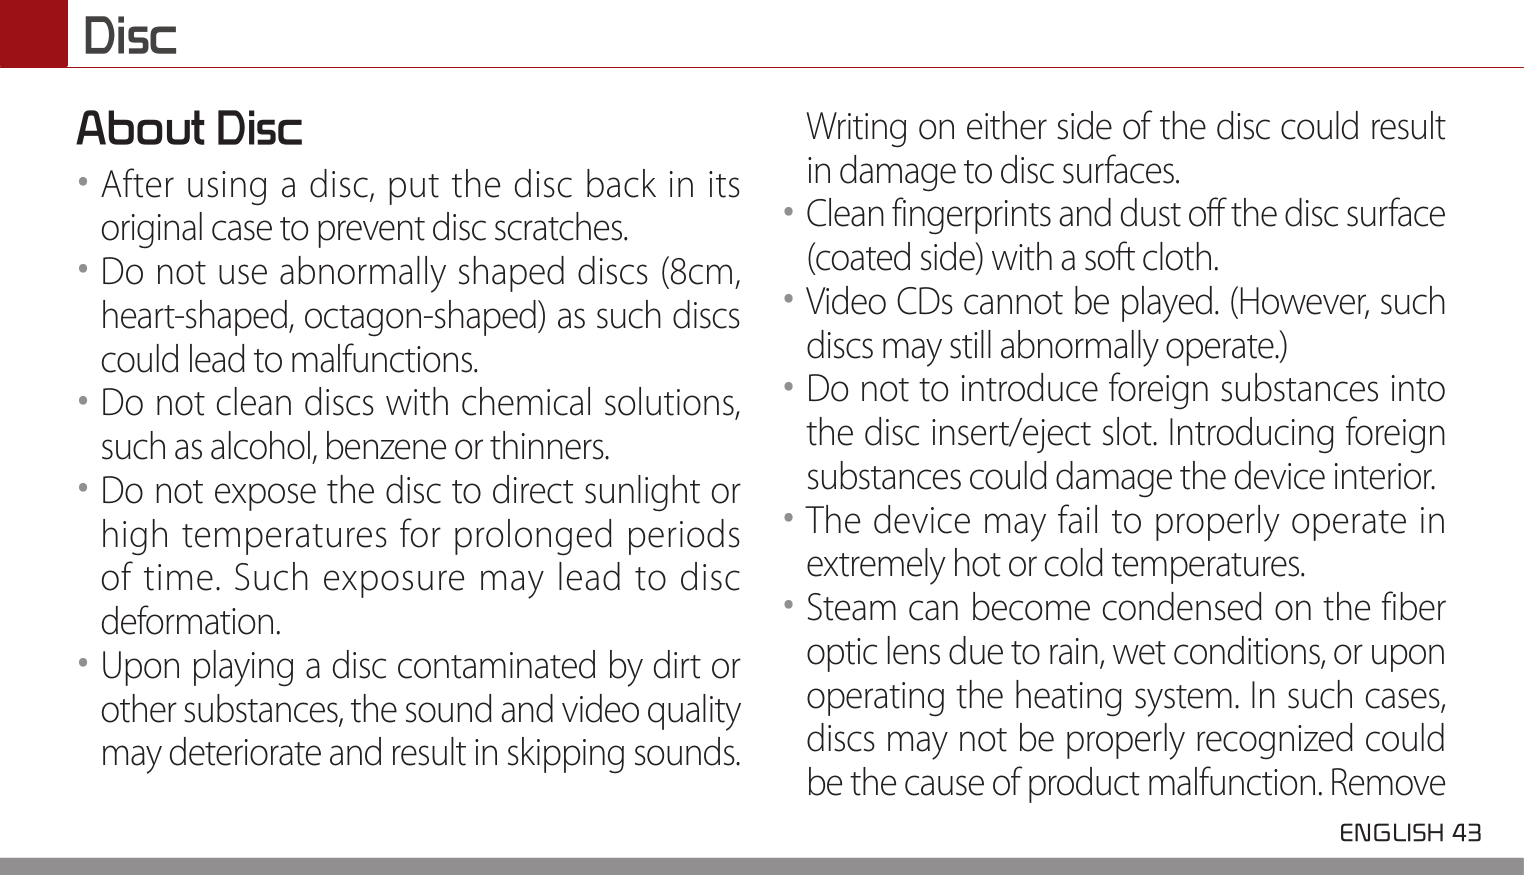  ENGLISH 43 DiscAbout Disc••After using a disc, put the disc back in its original case to prevent disc scratches.••Do not use abnormally shaped discs (8cm, heart-shaped, octagon-shaped) as such discs could lead to malfunctions.••Do not clean discs with chemical solutions, such as alcohol, benzene or thinners.••Do not expose the disc to direct sunlight or high temperatures for prolonged periods of time. Such exposure may lead to disc deformation.••Upon playing a disc contaminated by dirt or other substances, the sound and video quality may deteriorate and result in skipping sounds. Writing on either side of the disc could result in damage to disc surfaces.••Clean fingerprints and dust off the disc surface (coated side) with a soft cloth.••Video CDs cannot be played. (However, such discs may still abnormally operate.)••Do not to introduce foreign substances into the disc insert/eject slot. Introducing foreign substances could damage the device interior.••The device may fail to properly operate in extremely hot or cold temperatures.••Steam can become condensed on the fiber optic lens due to rain, wet conditions, or upon operating the heating system. In such cases, discs may not be properly recognized could be the cause of product malfunction. Remove 